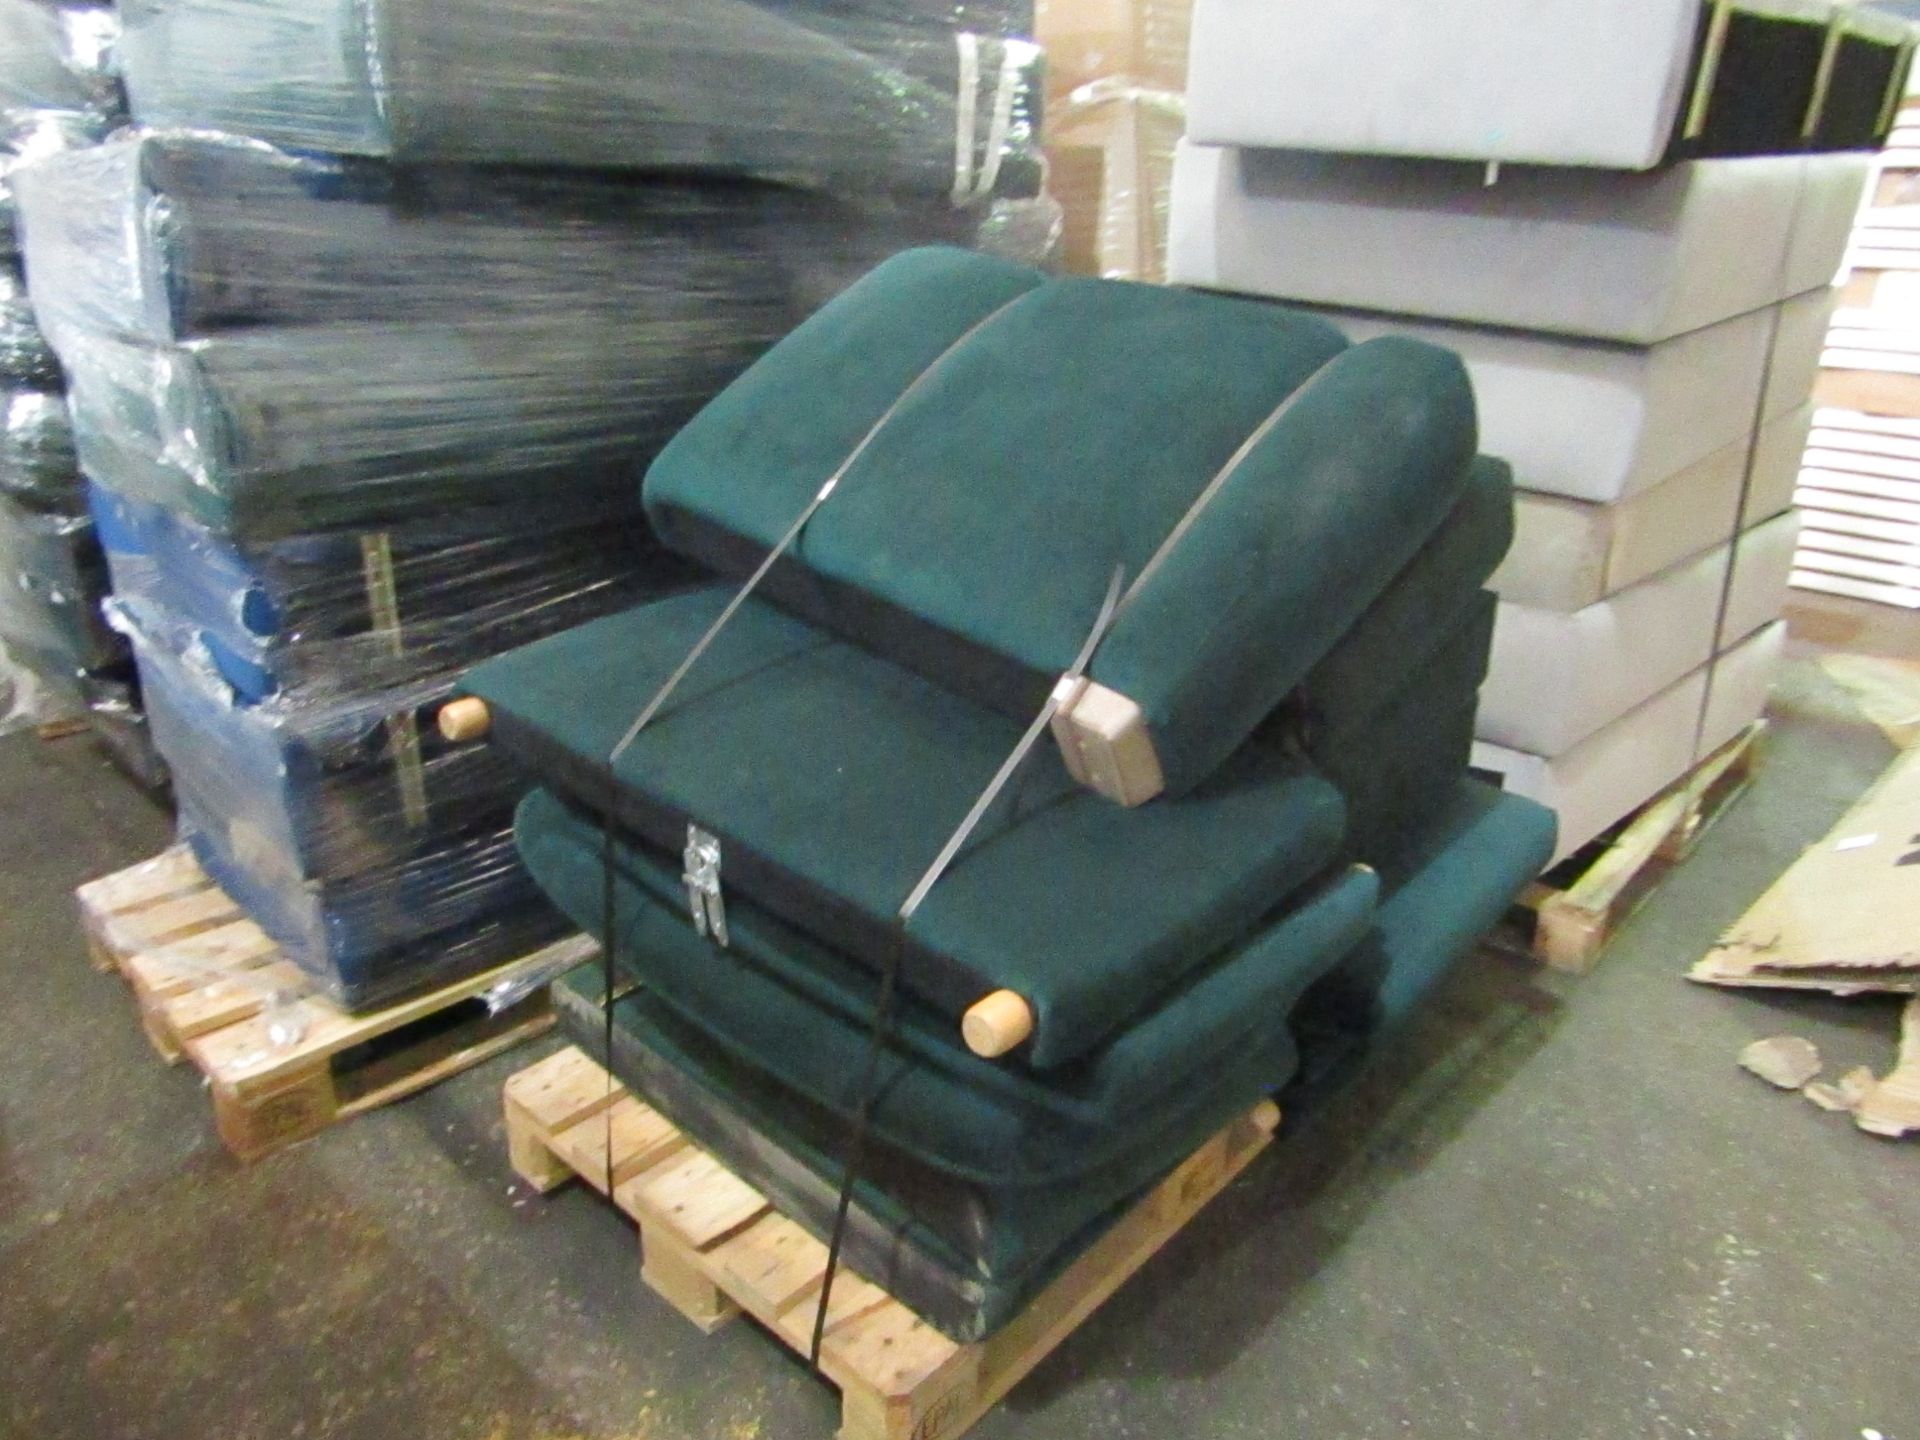 0% Buyers Premium, 24 Pallets of Genuine SNUG SOFA parts - Mixed Lots of Bases Backs Arms Cushions - Image 10 of 20